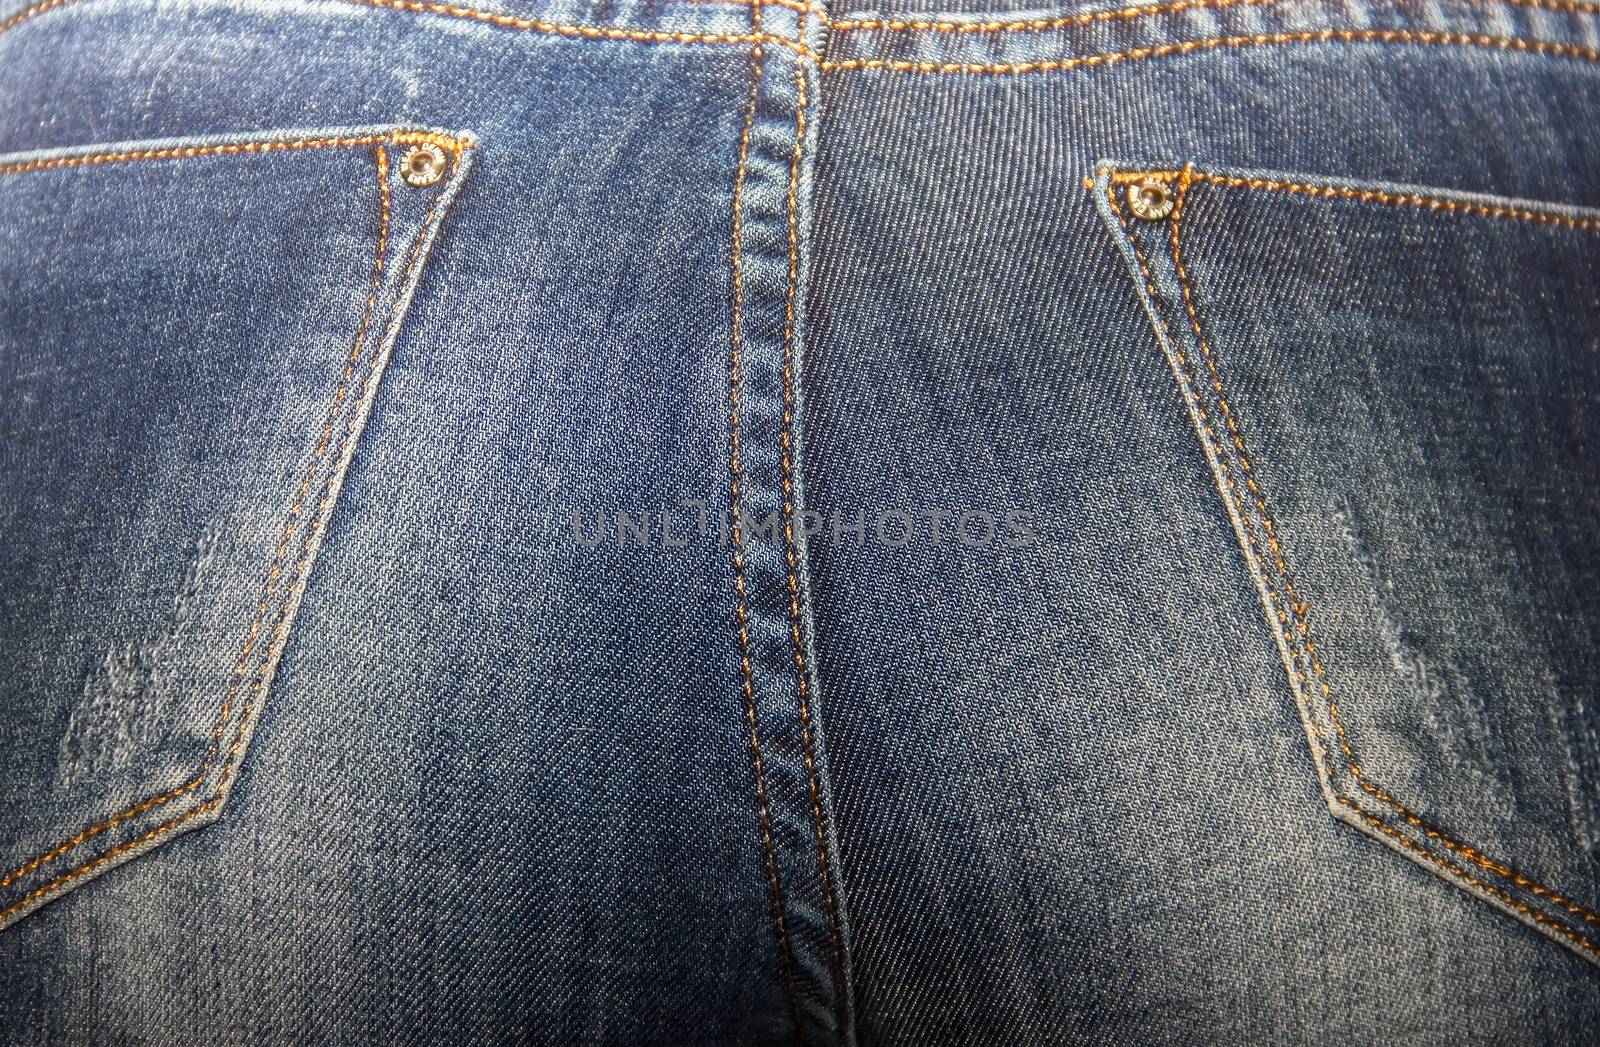 ass beautiful women in tight jeans, women's buttocks in blue jeans close-up, soft focus